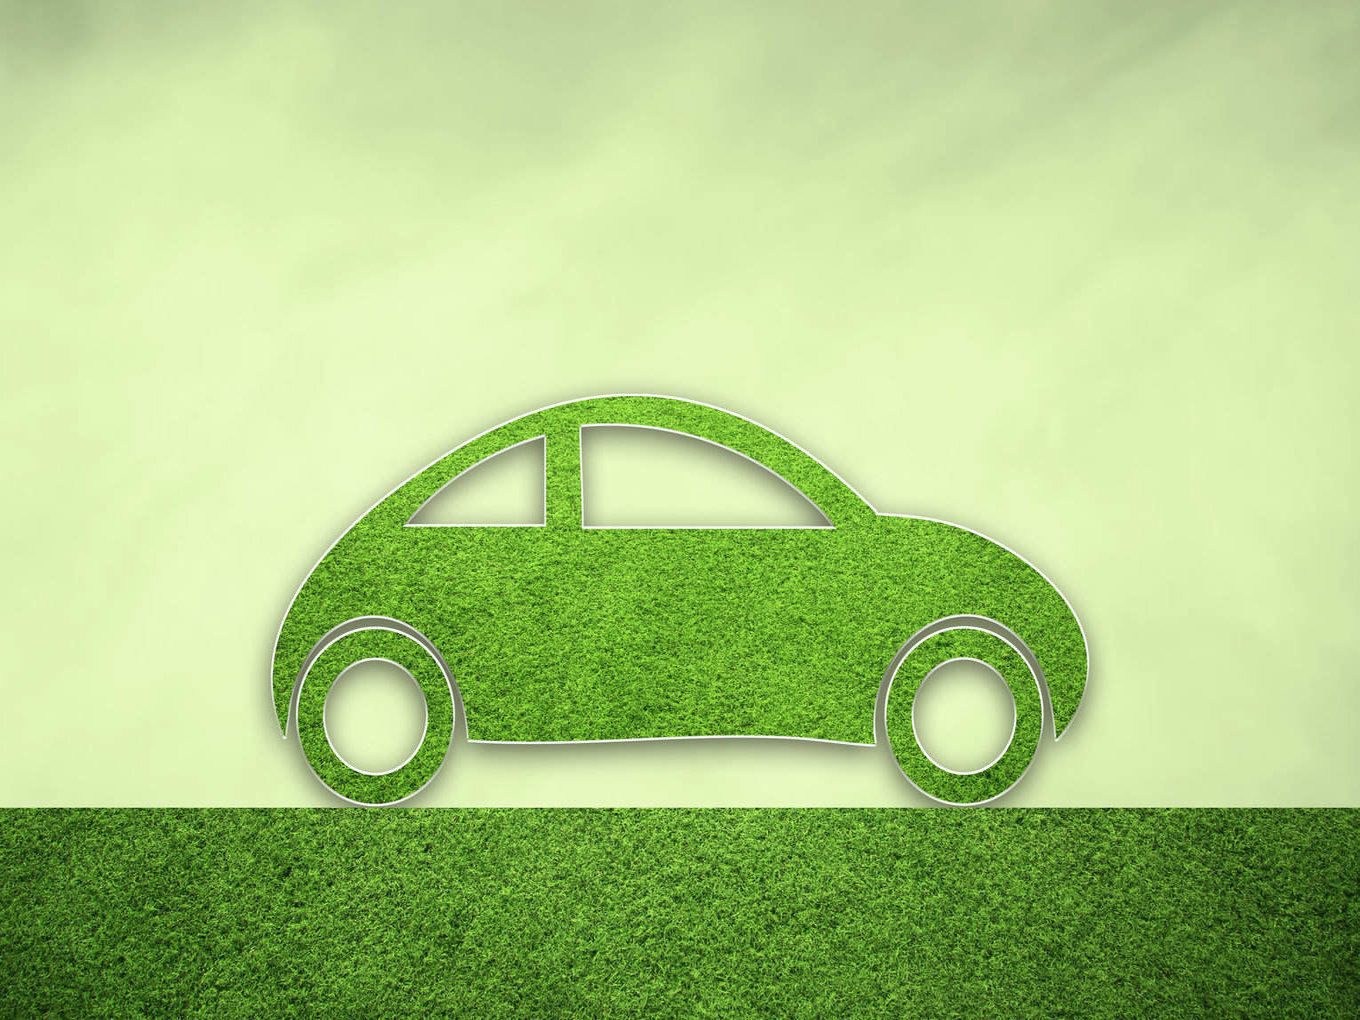 Are Electric Vehicles Really Green If They Don’t Use Clean Energy?